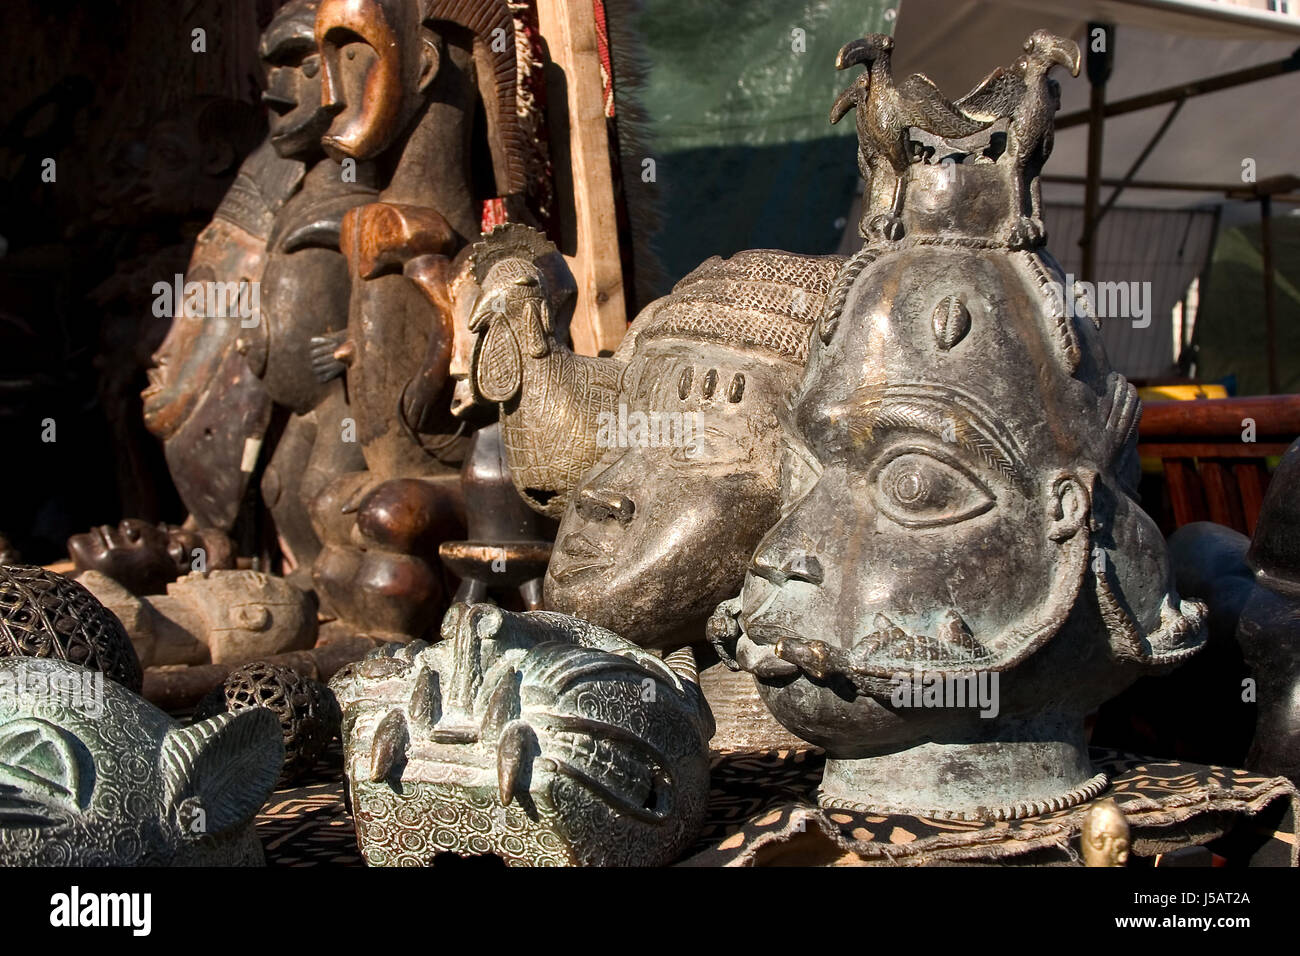 art antique metal exotic kitsch patina rummage squiggly second-hand trashy Stock Photo